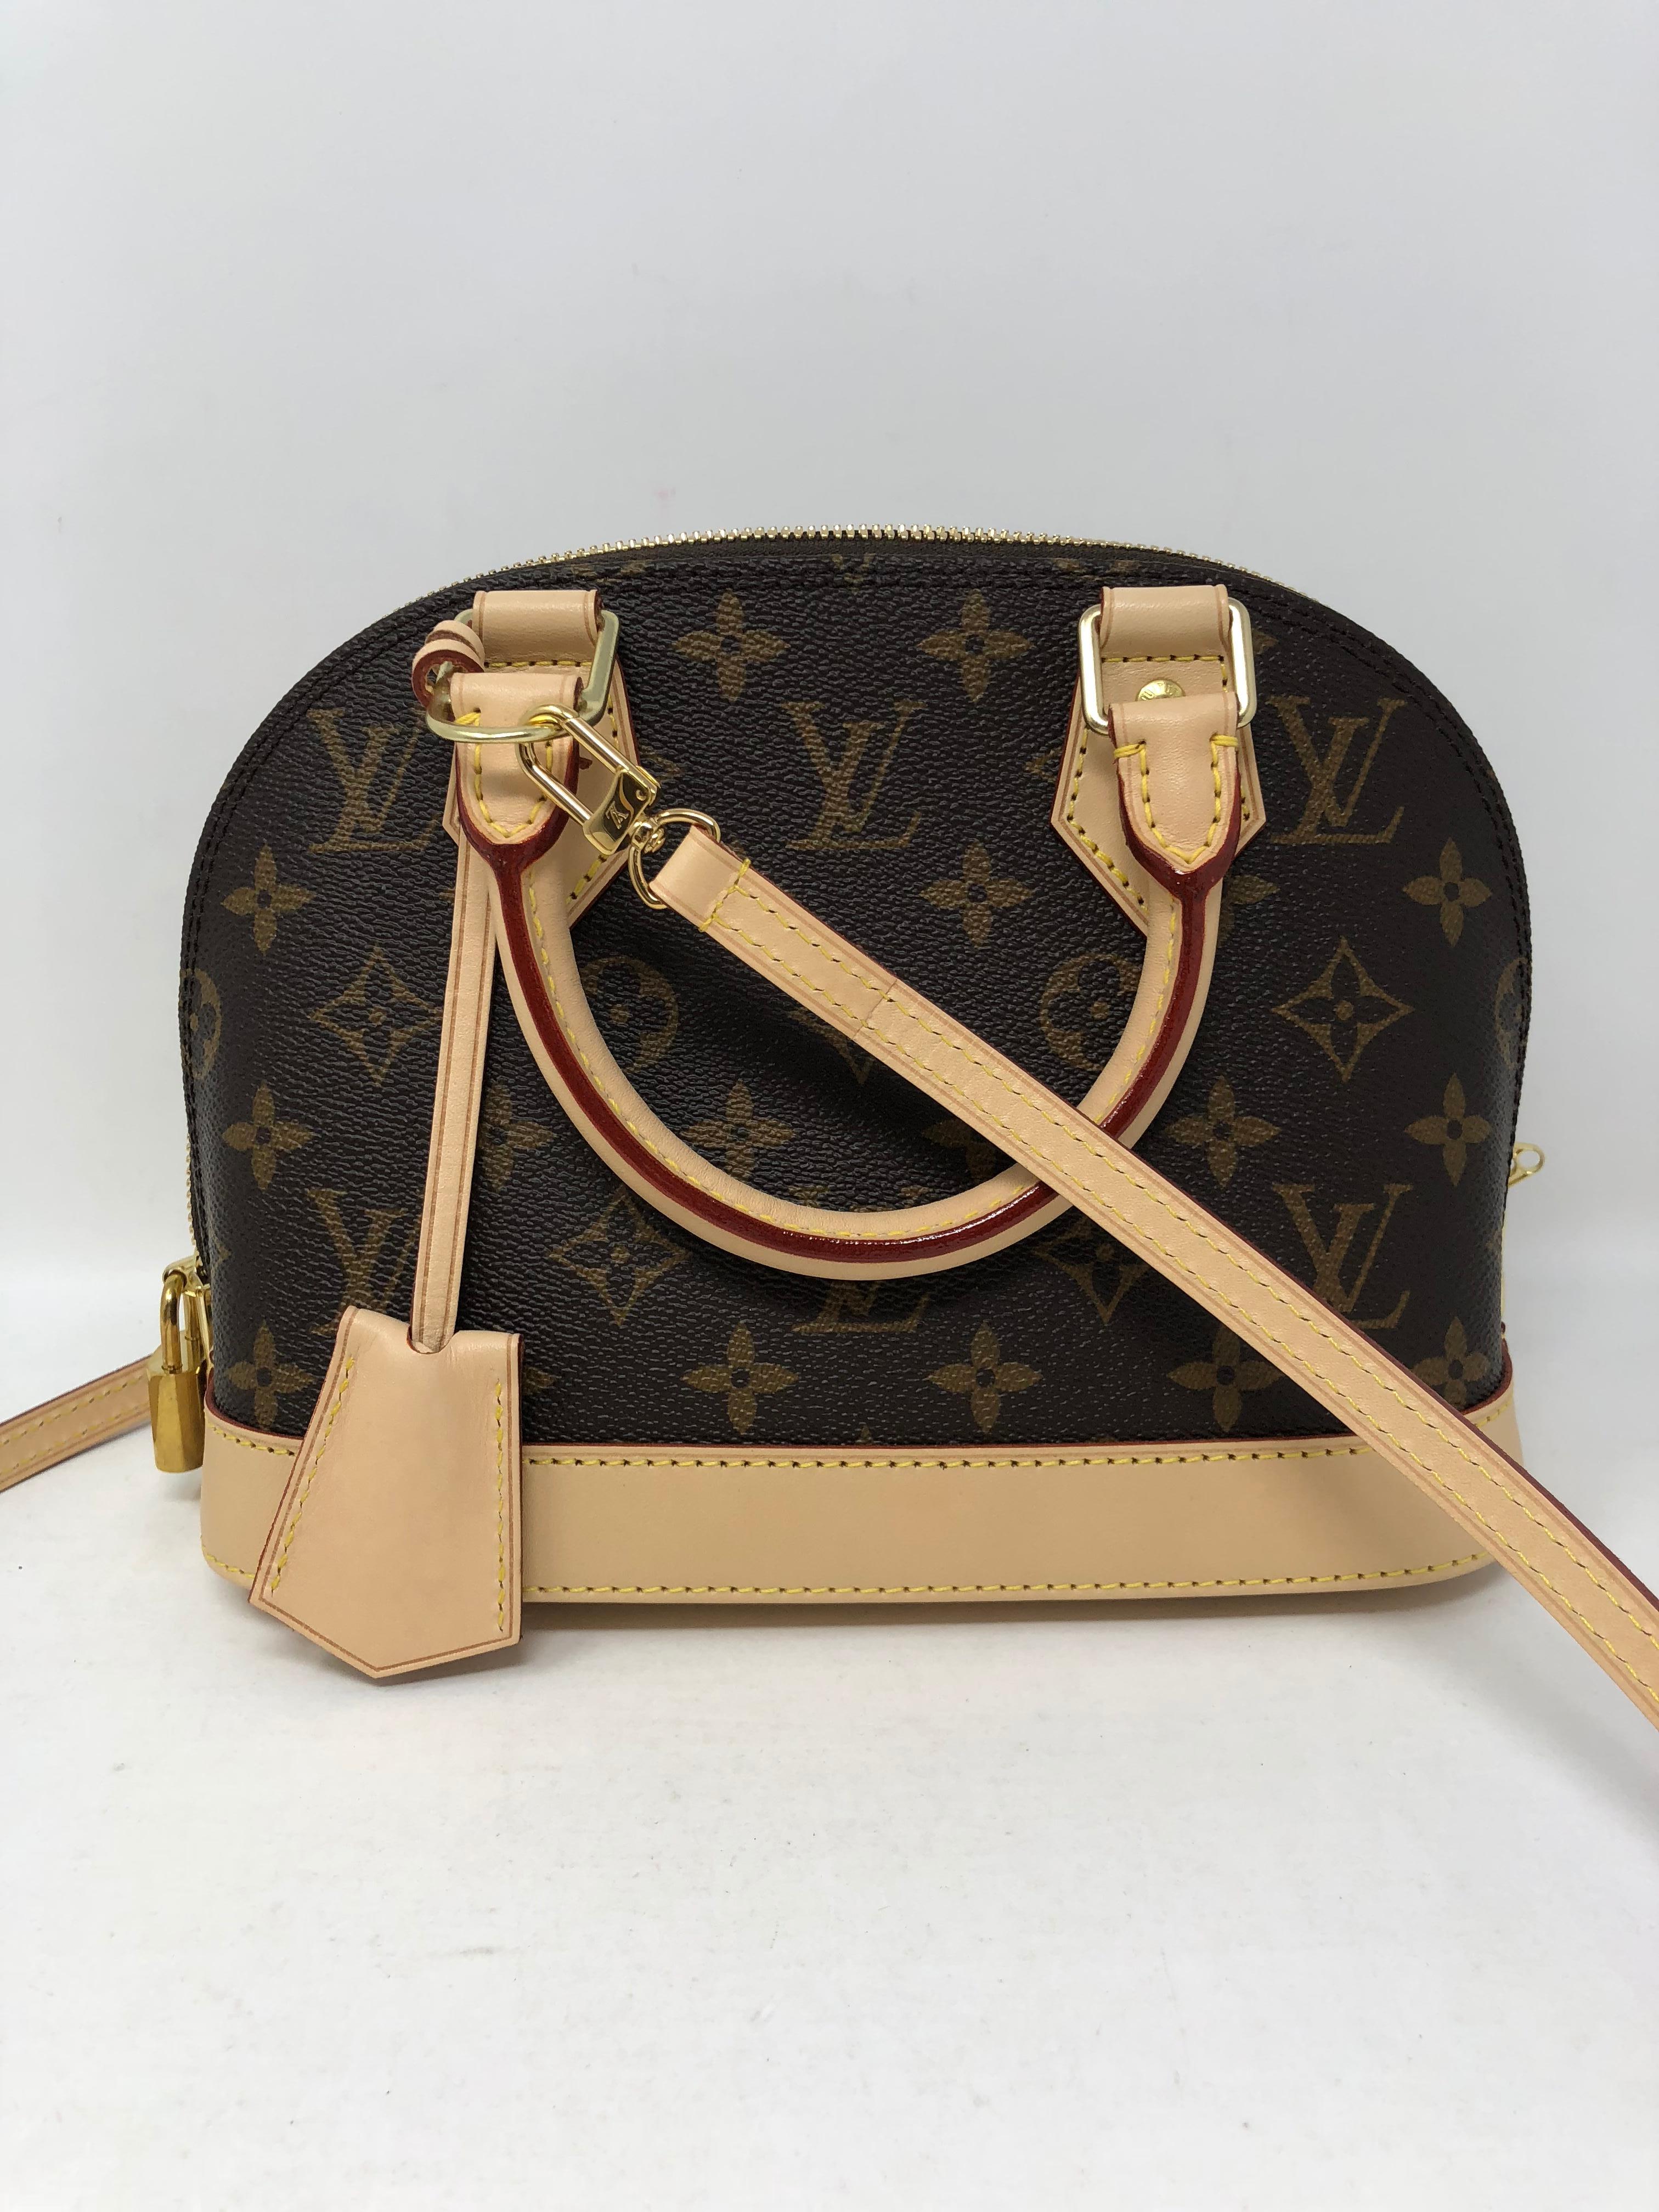 Louis Vuitton Alma BB Crossbody in Monogram. Sold out and very limited. This is the miniature version of the Art Deco icon from 1934. Comes with the strap that makes it a hands free solution. Date code is AA 4148. Lock and key and clochette included